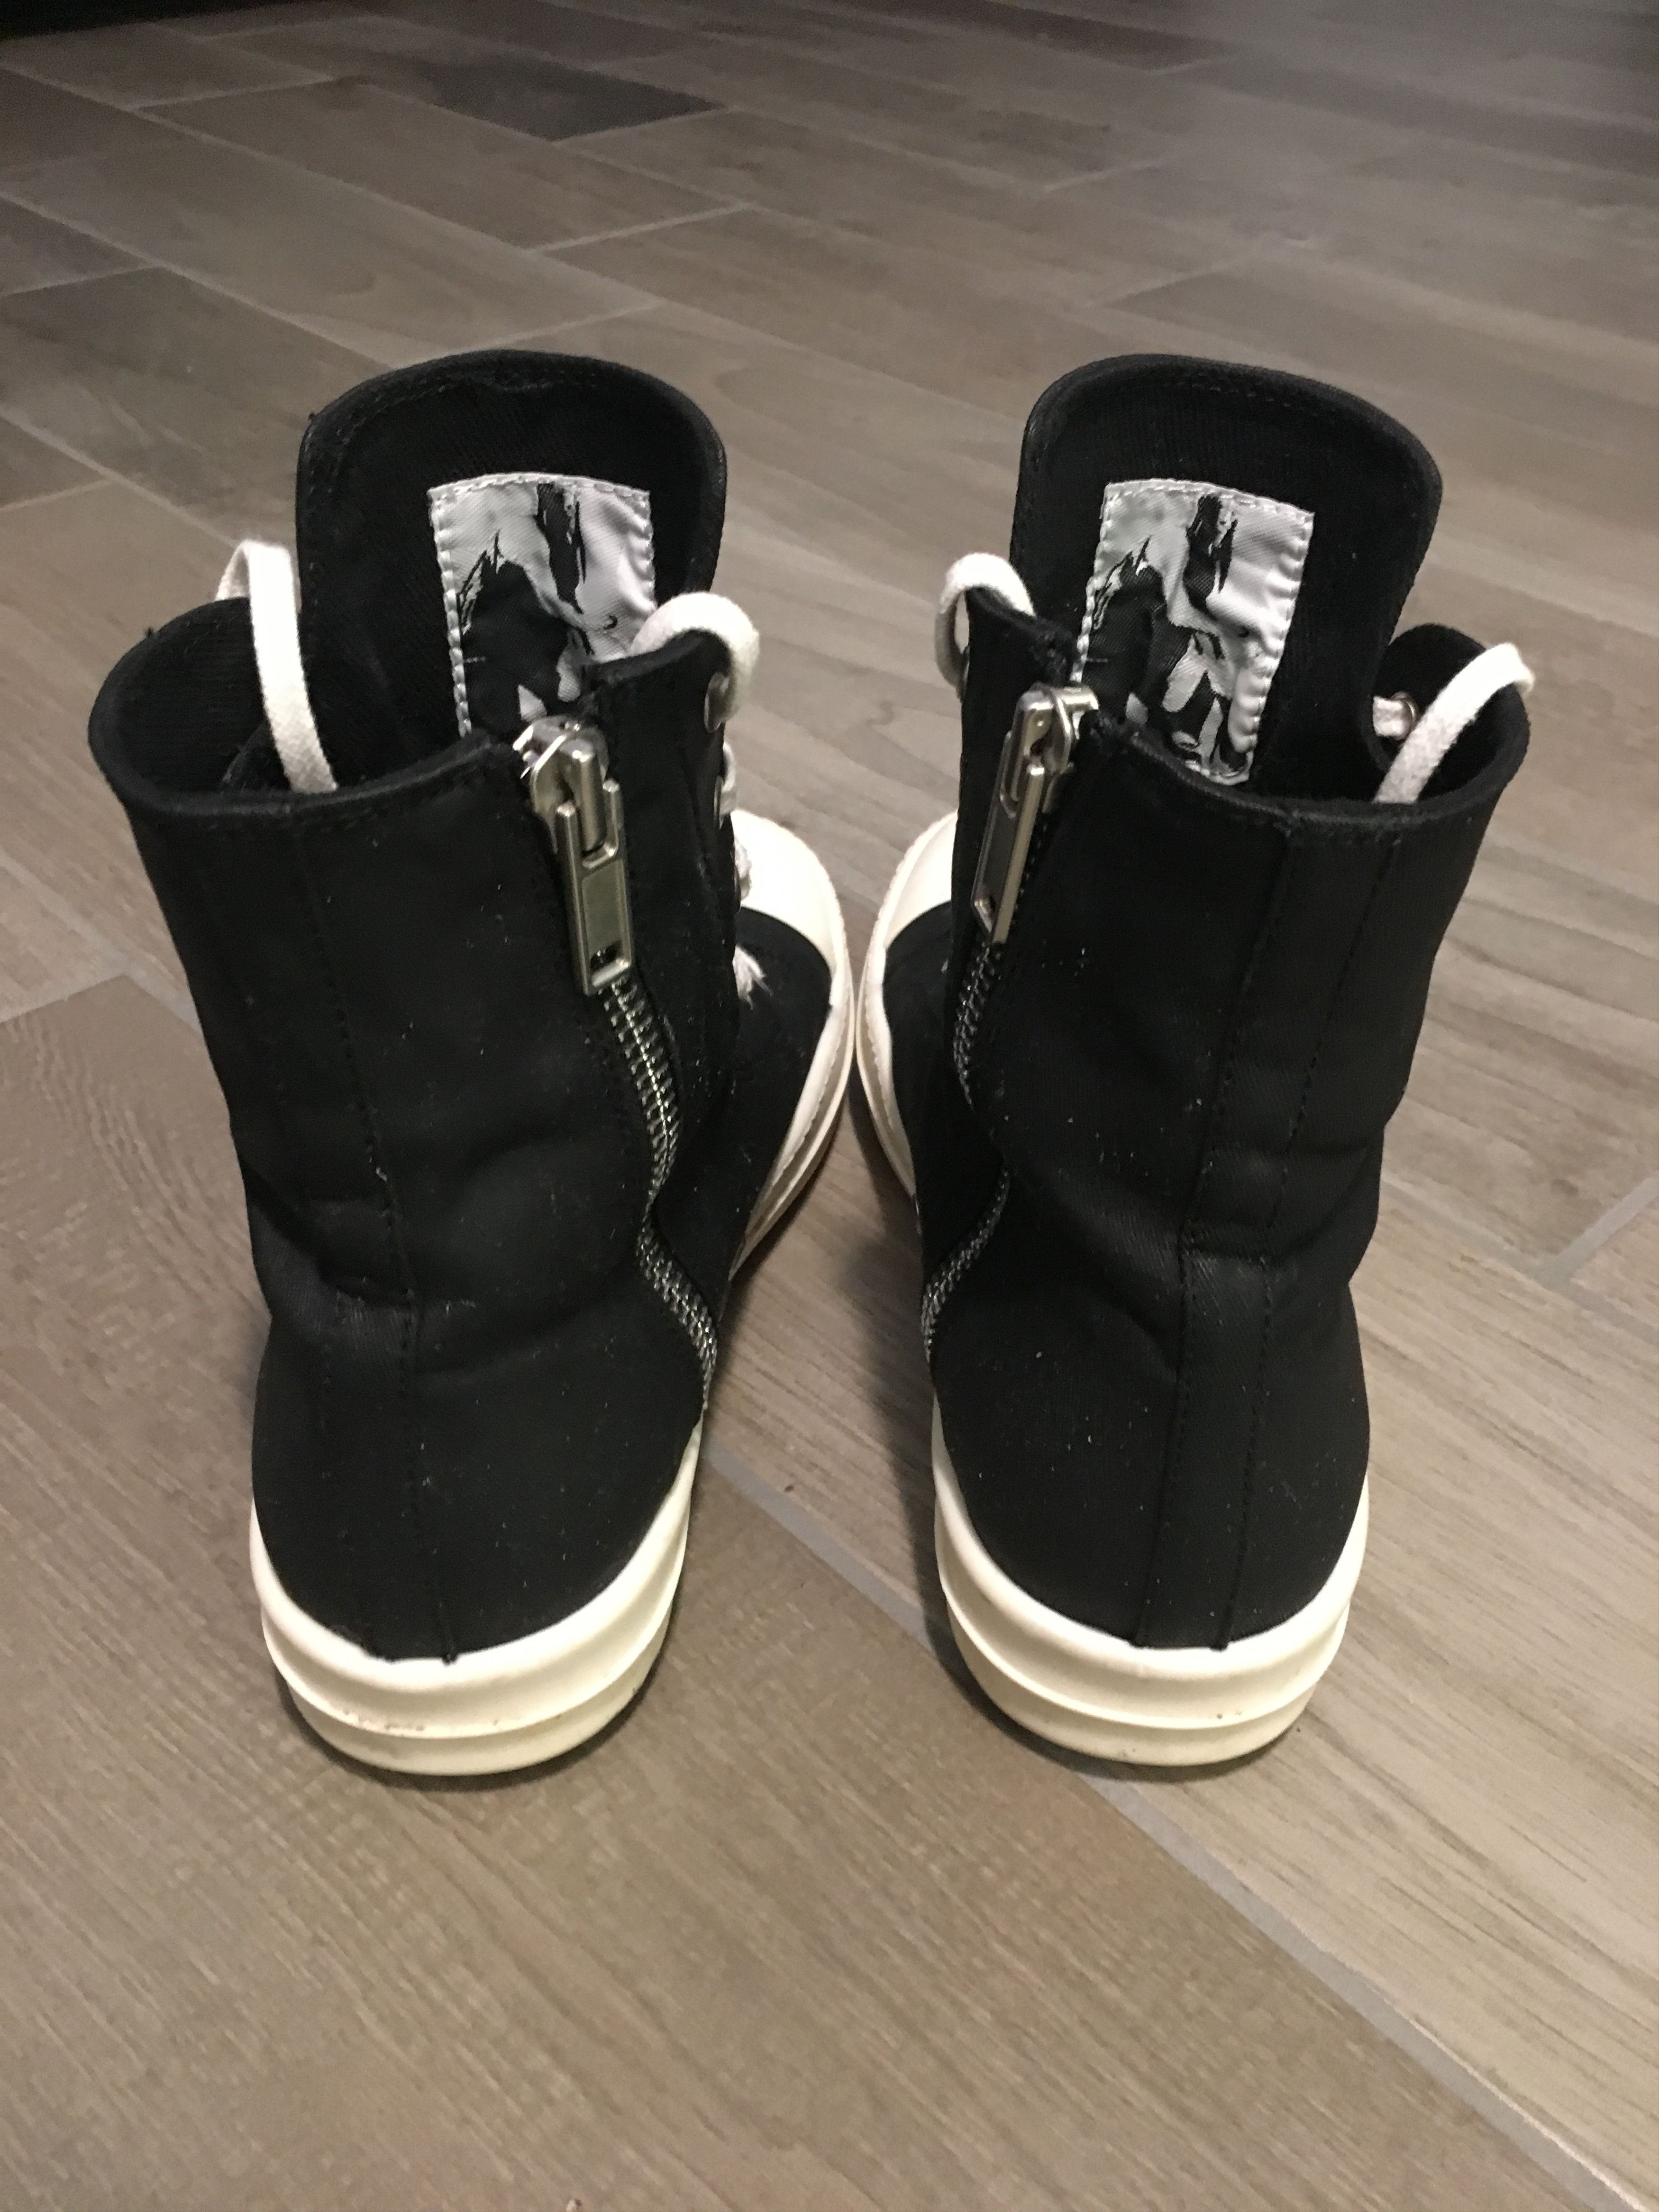 Rick Owens Drkshdw Waxed Ramones Size US 7 / EU 40 - 2 Preview